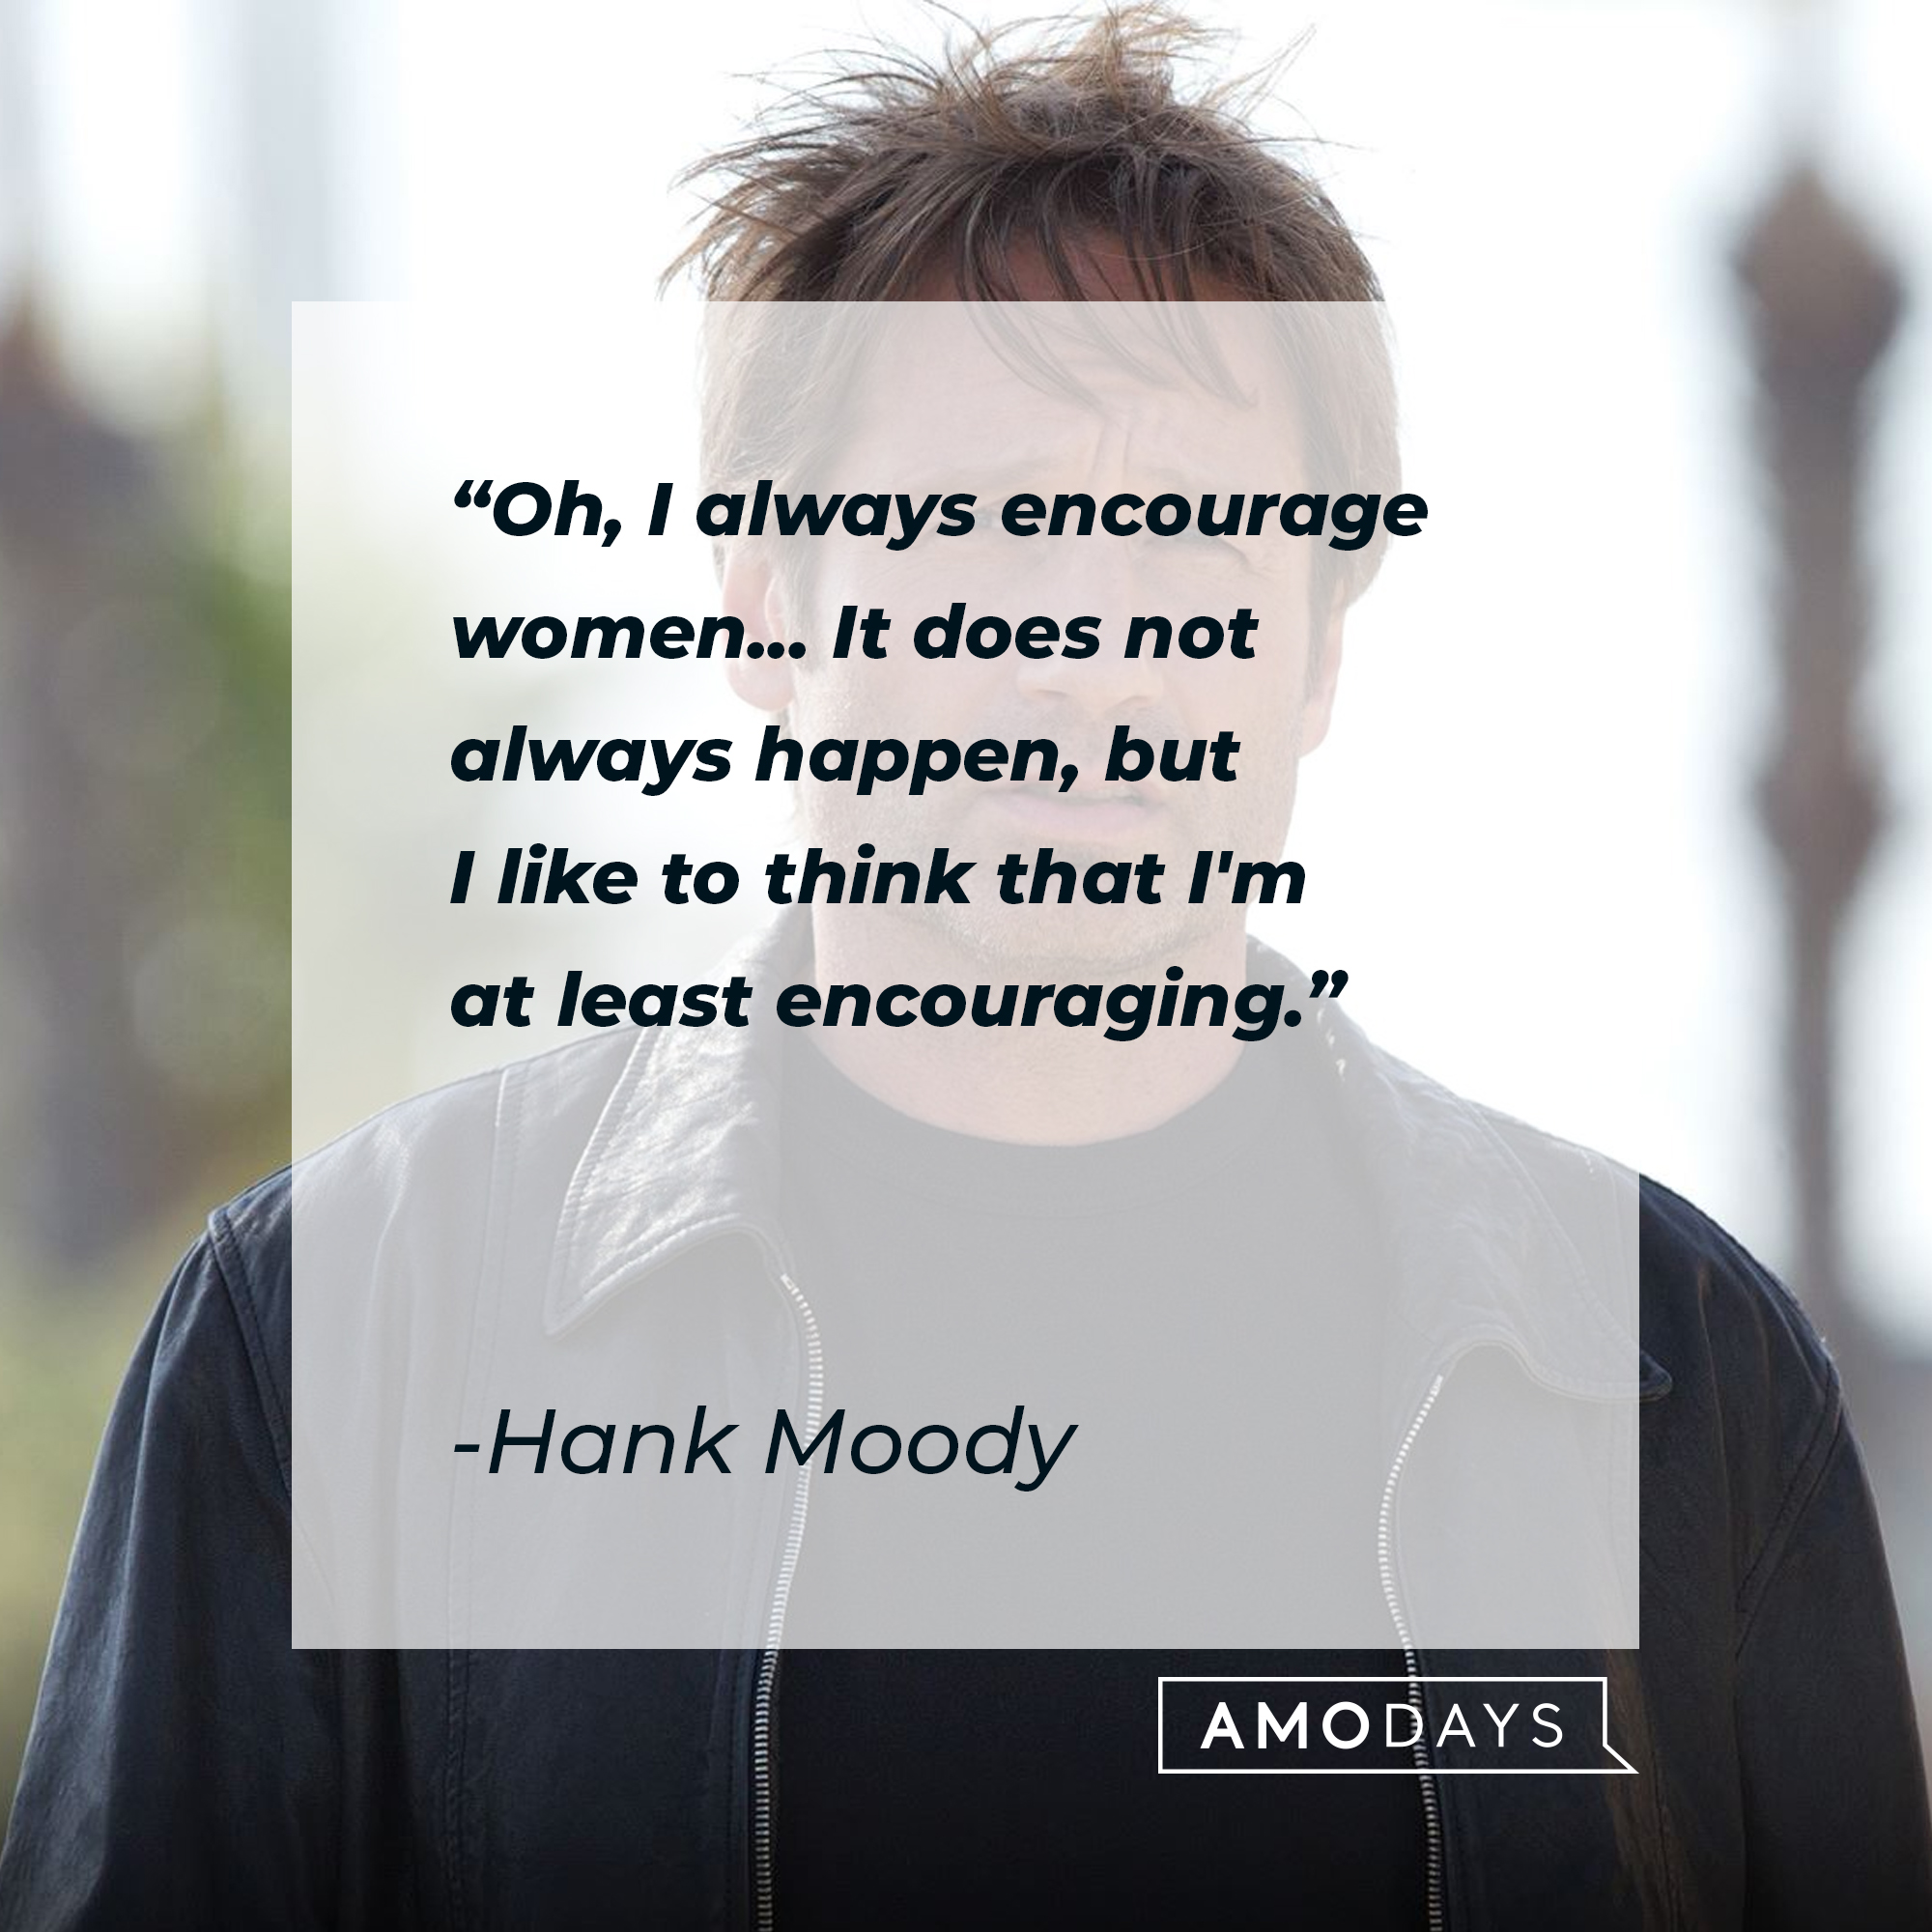 Hank Moody's quote:  "Oh, I always encourage women... It does not always happen, but I like to think that I'm at least encouraging." | Image: AmoDays